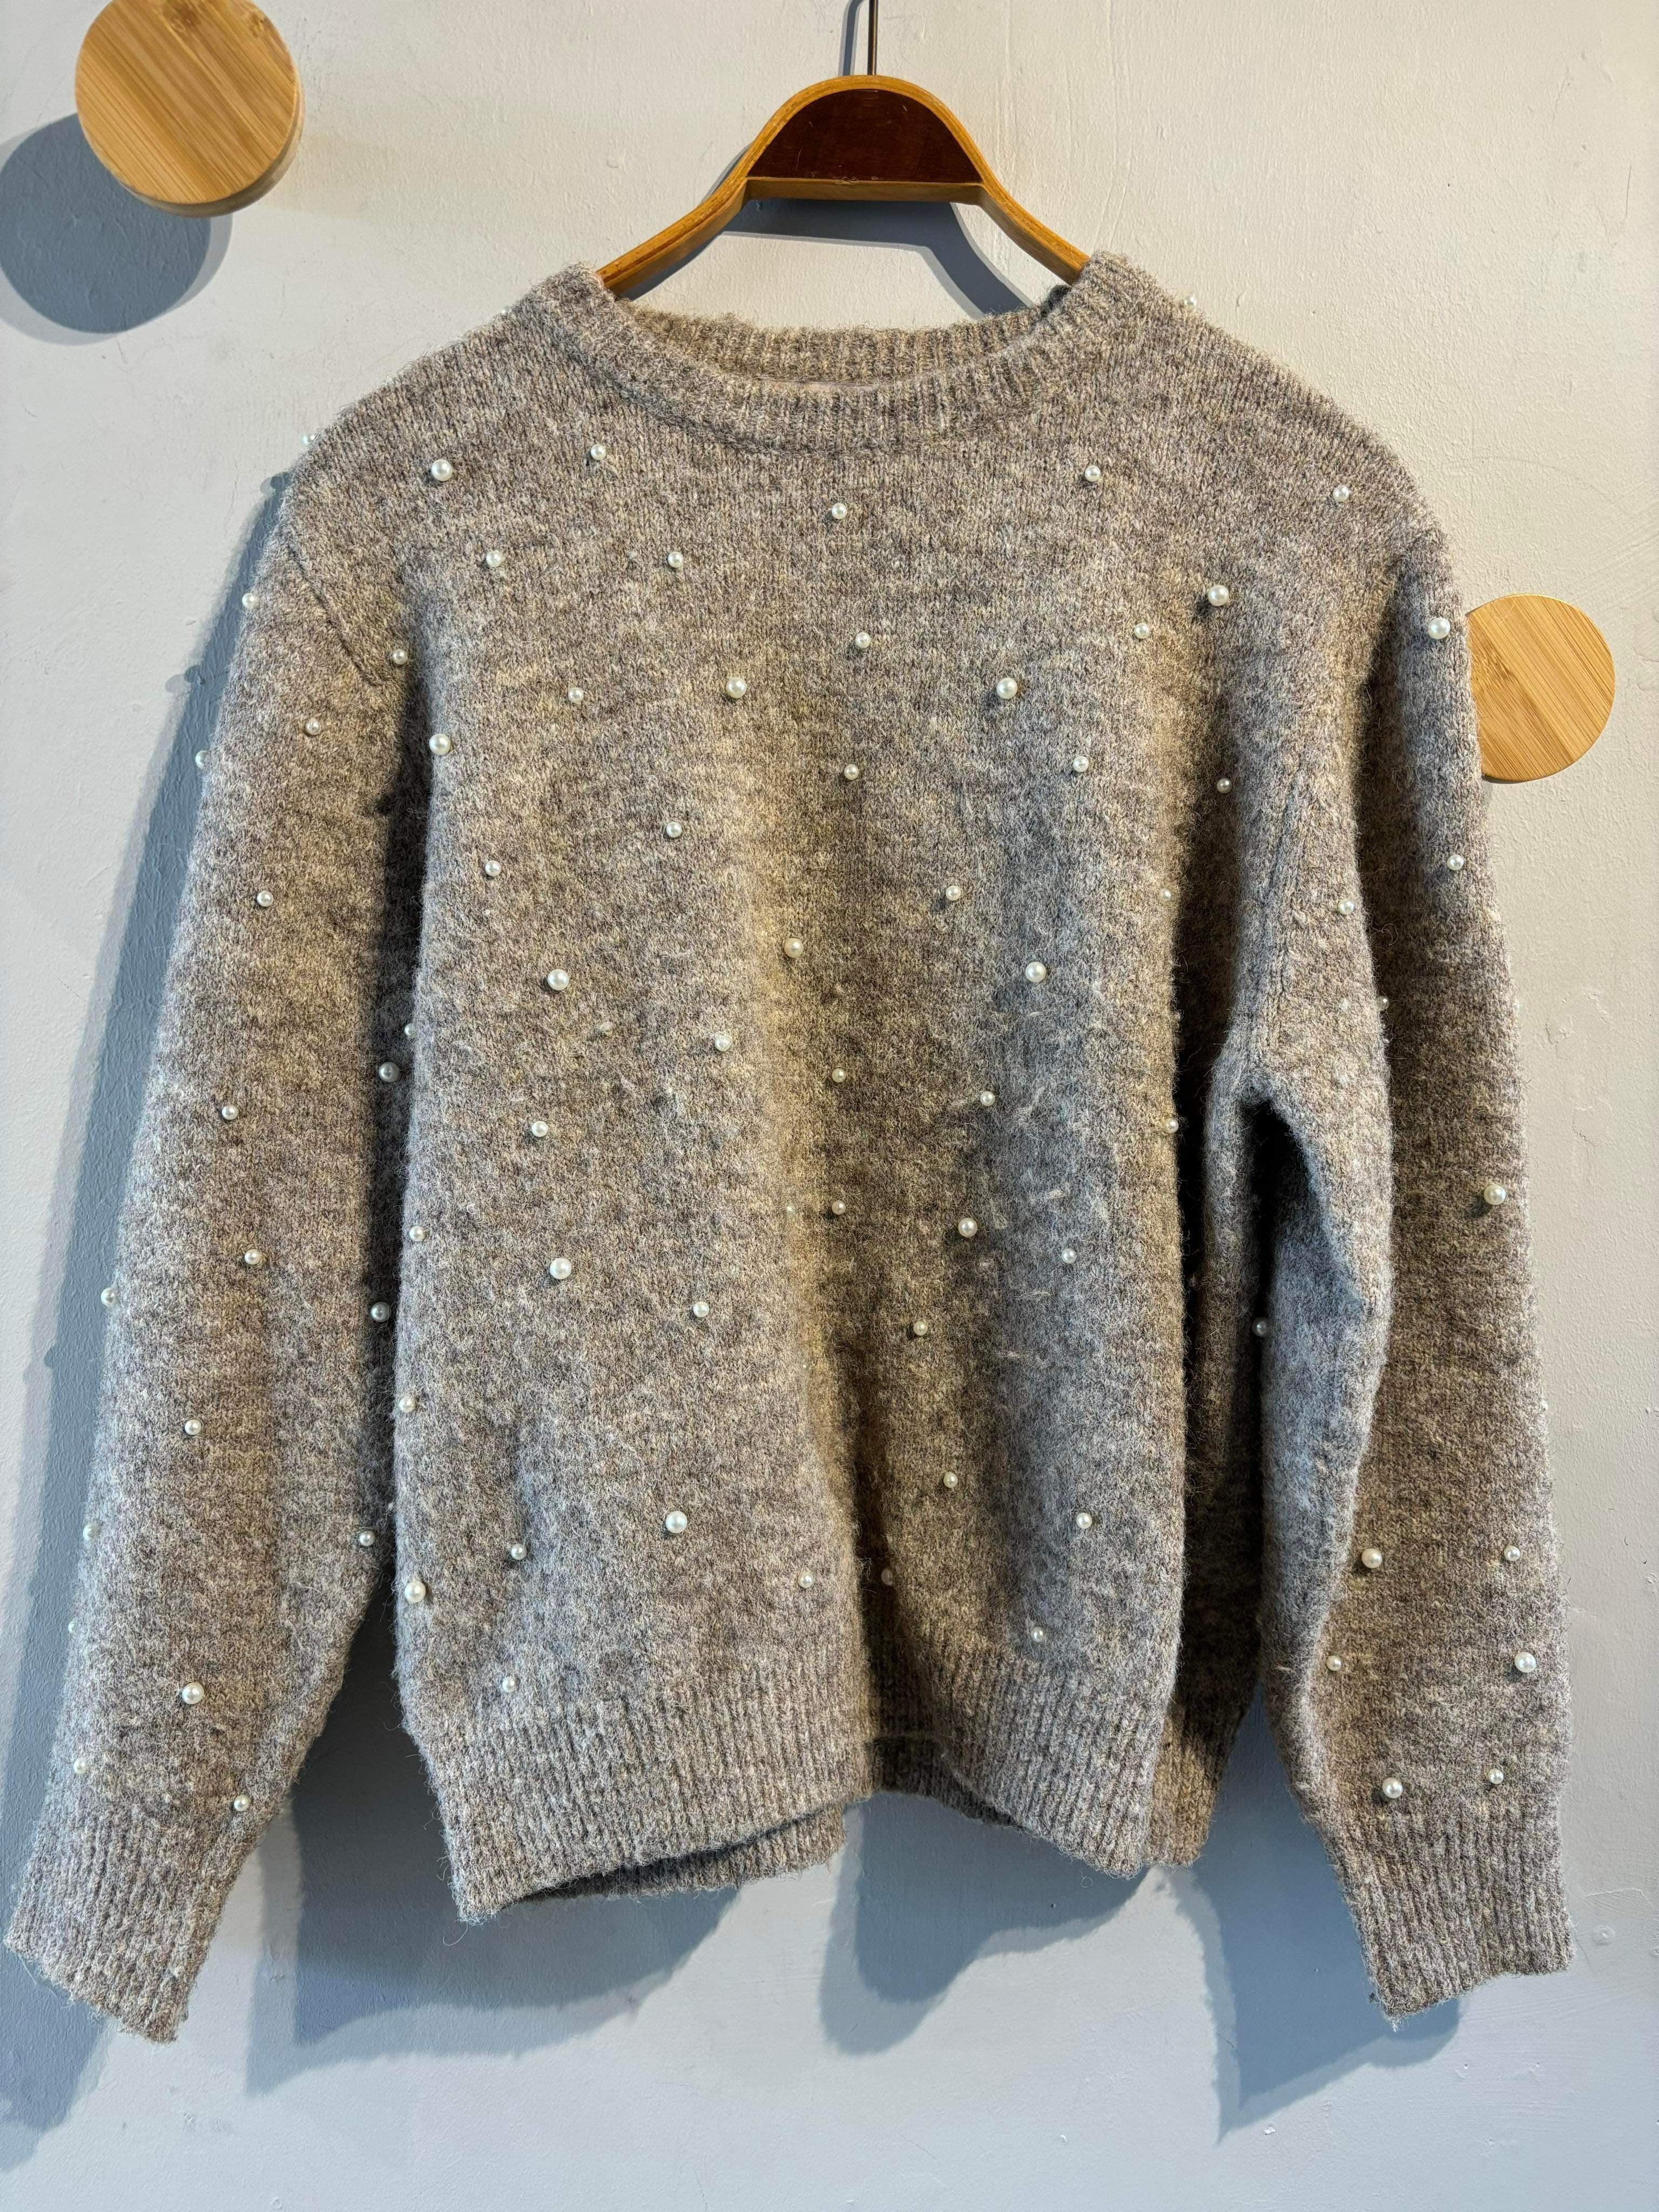 A View - Sweater - Size: S